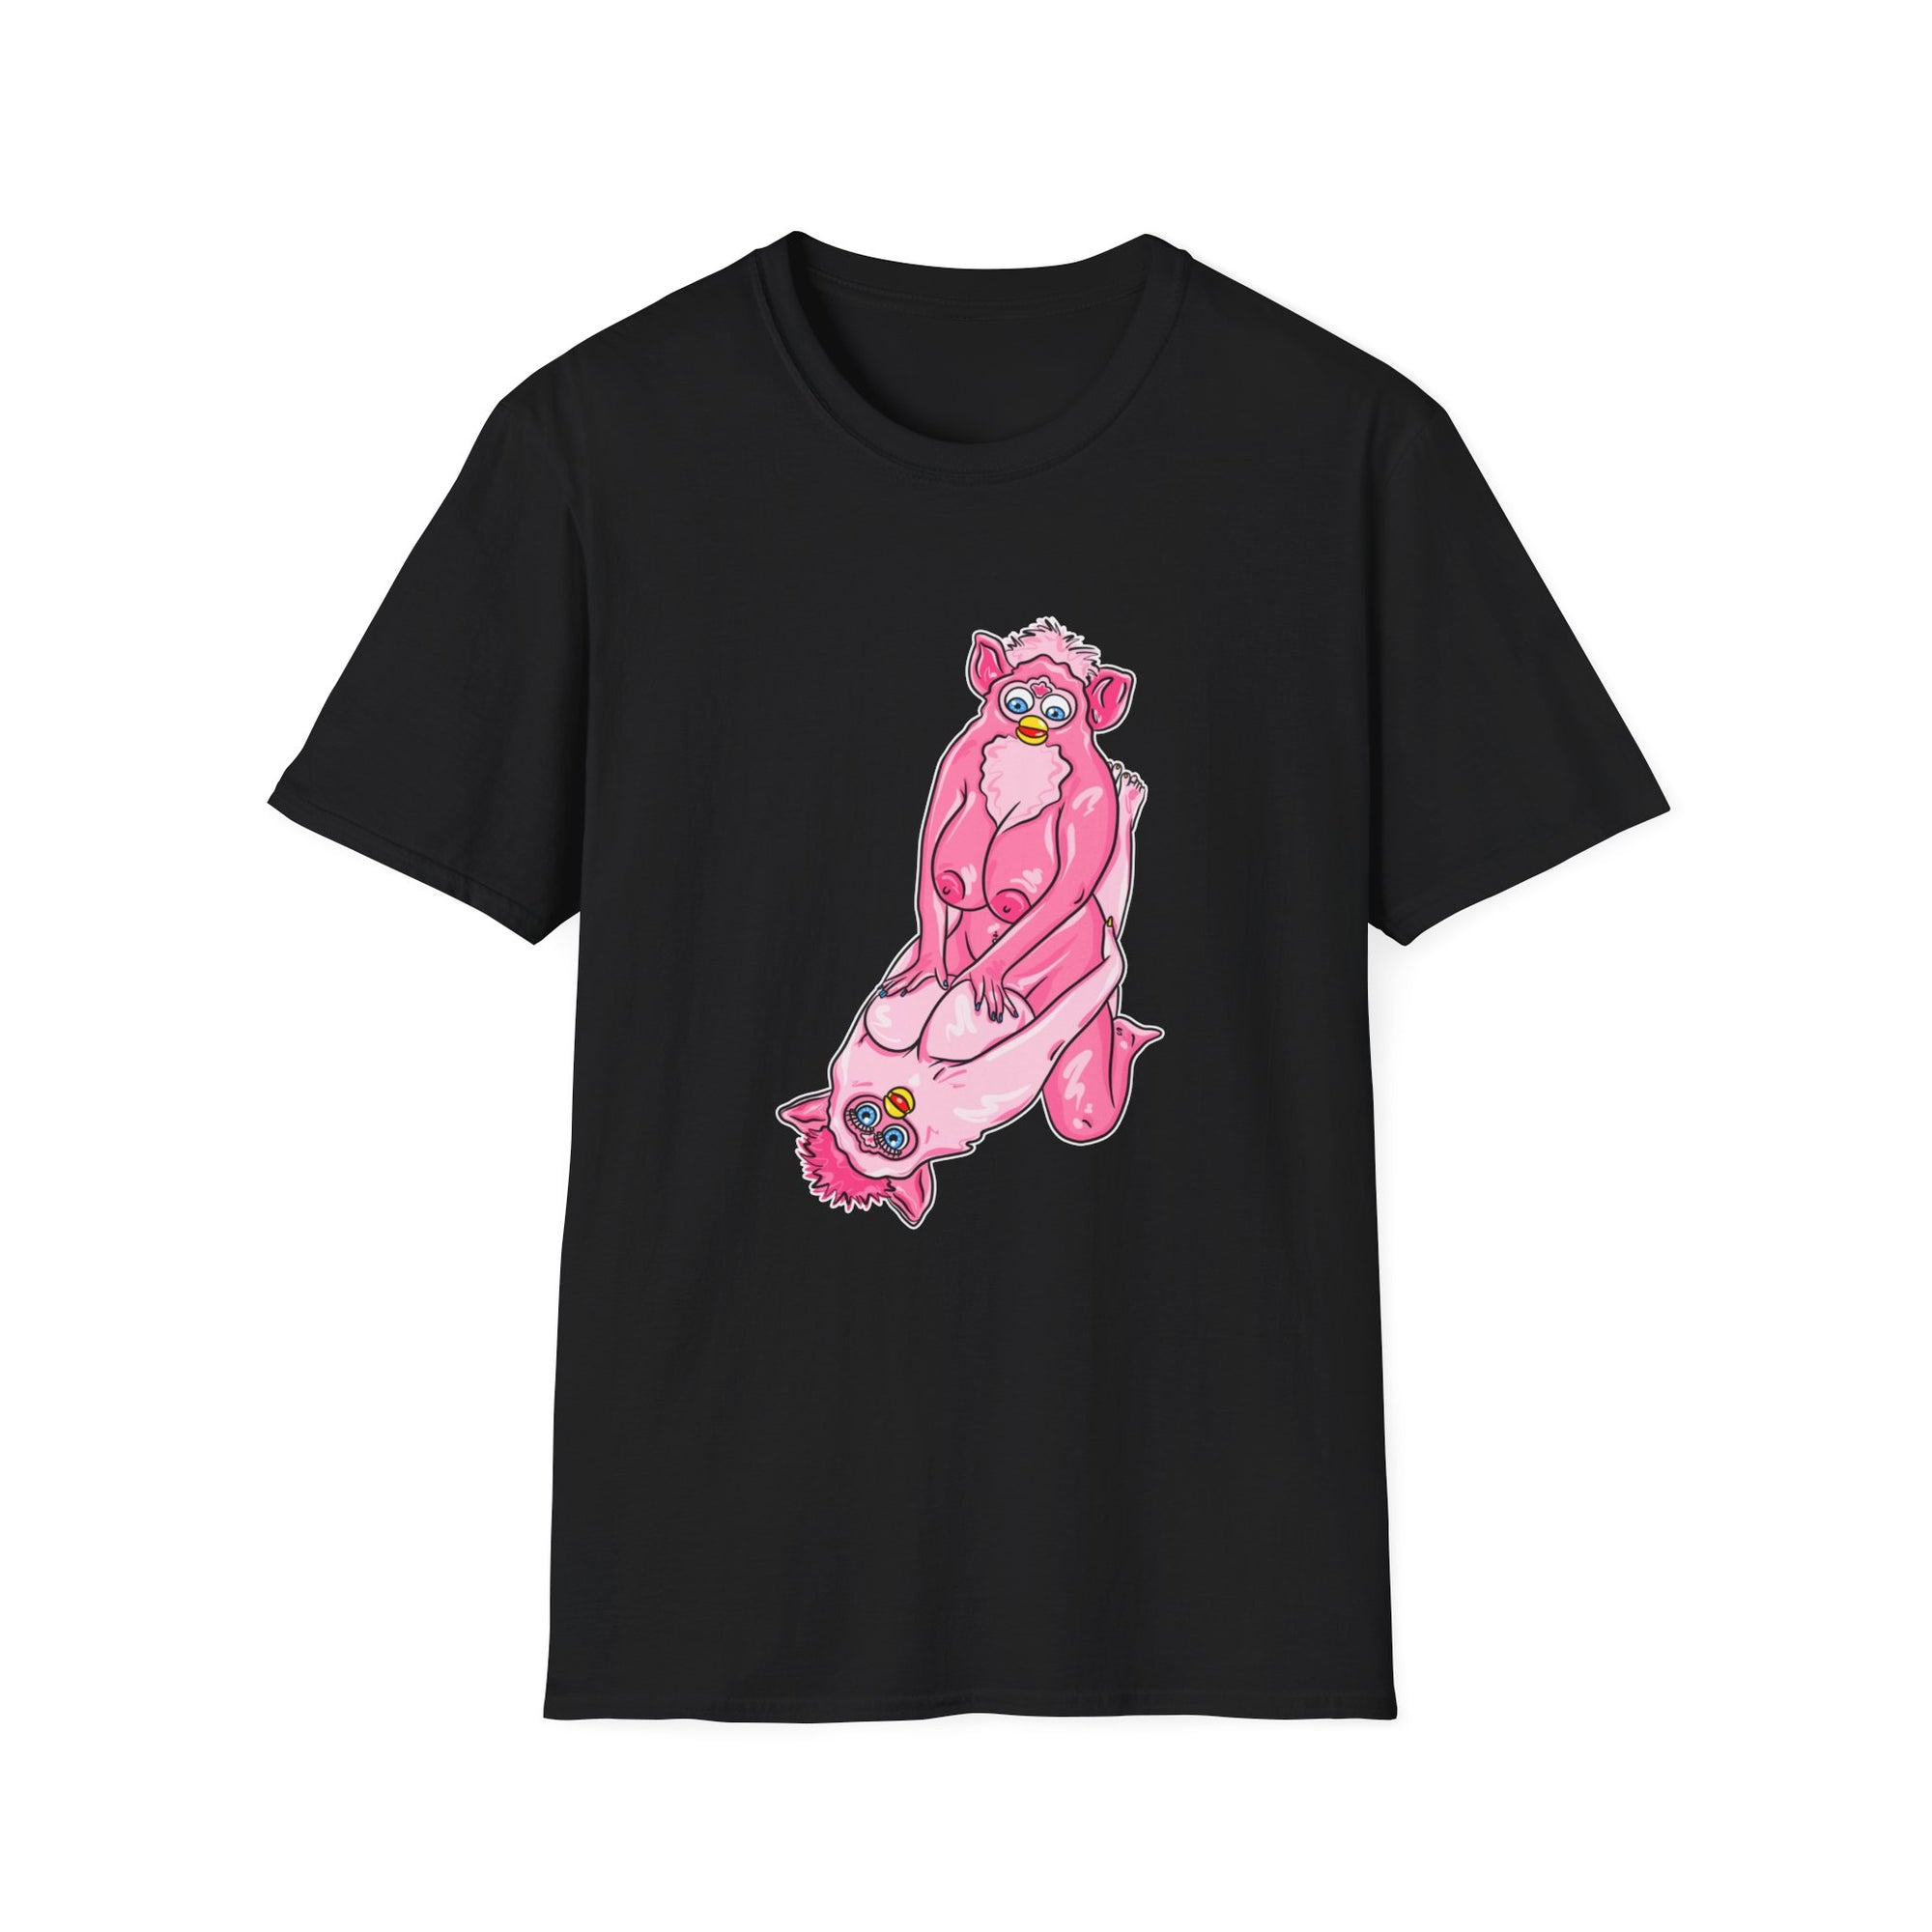 FURBY STRADDLE PARTY - Unisex Shirt